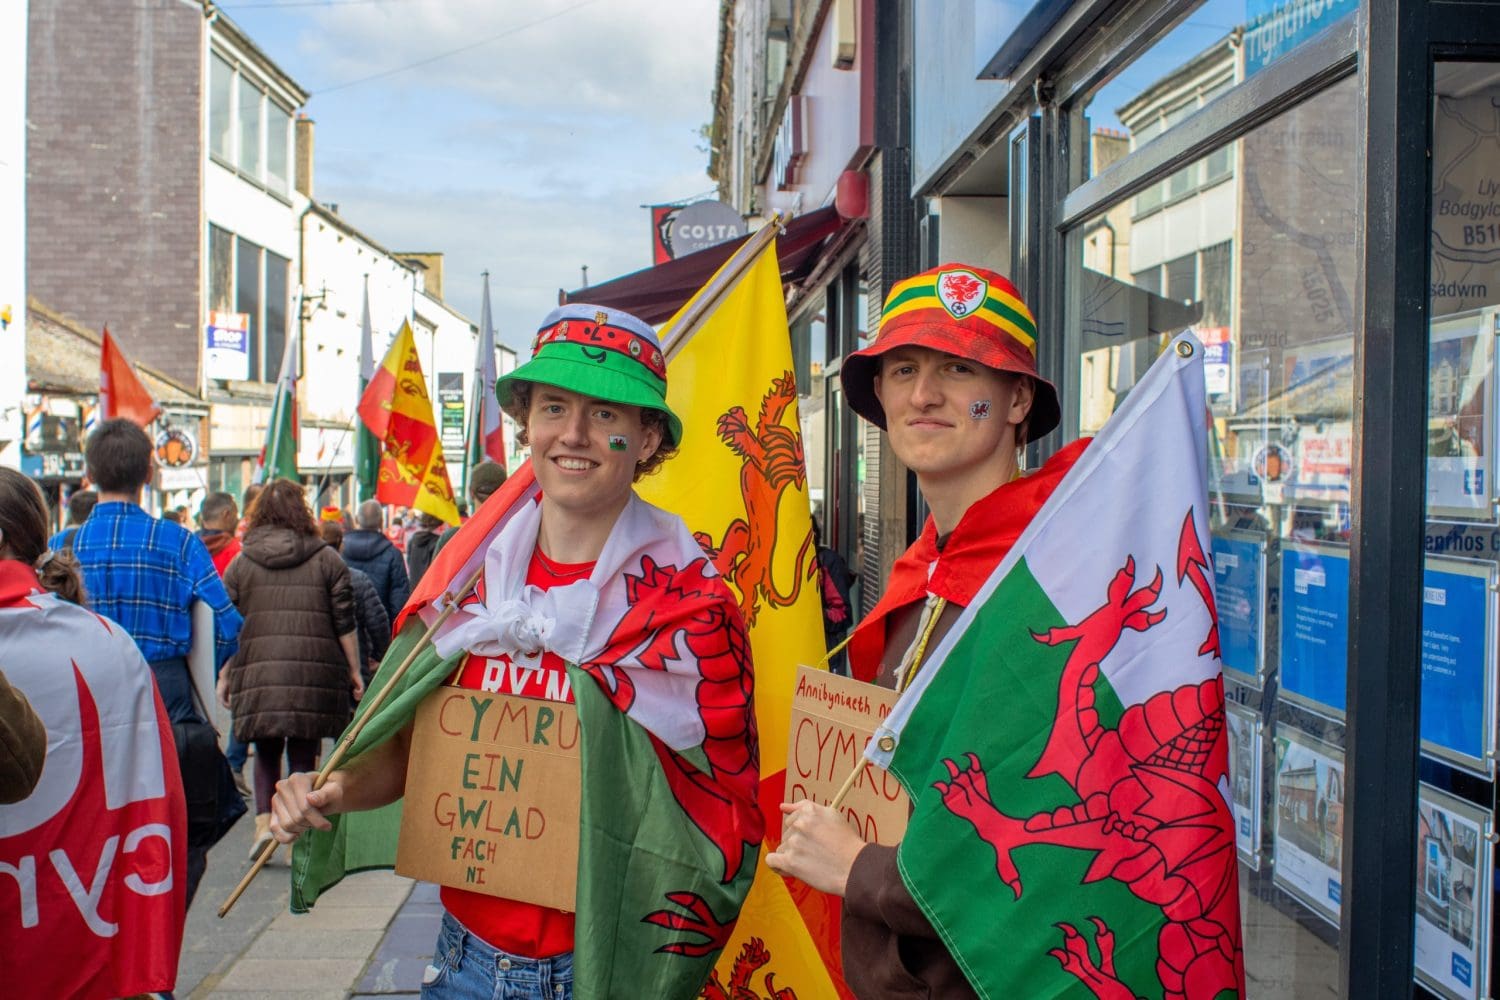 More people on the Welsh independence march in Wales